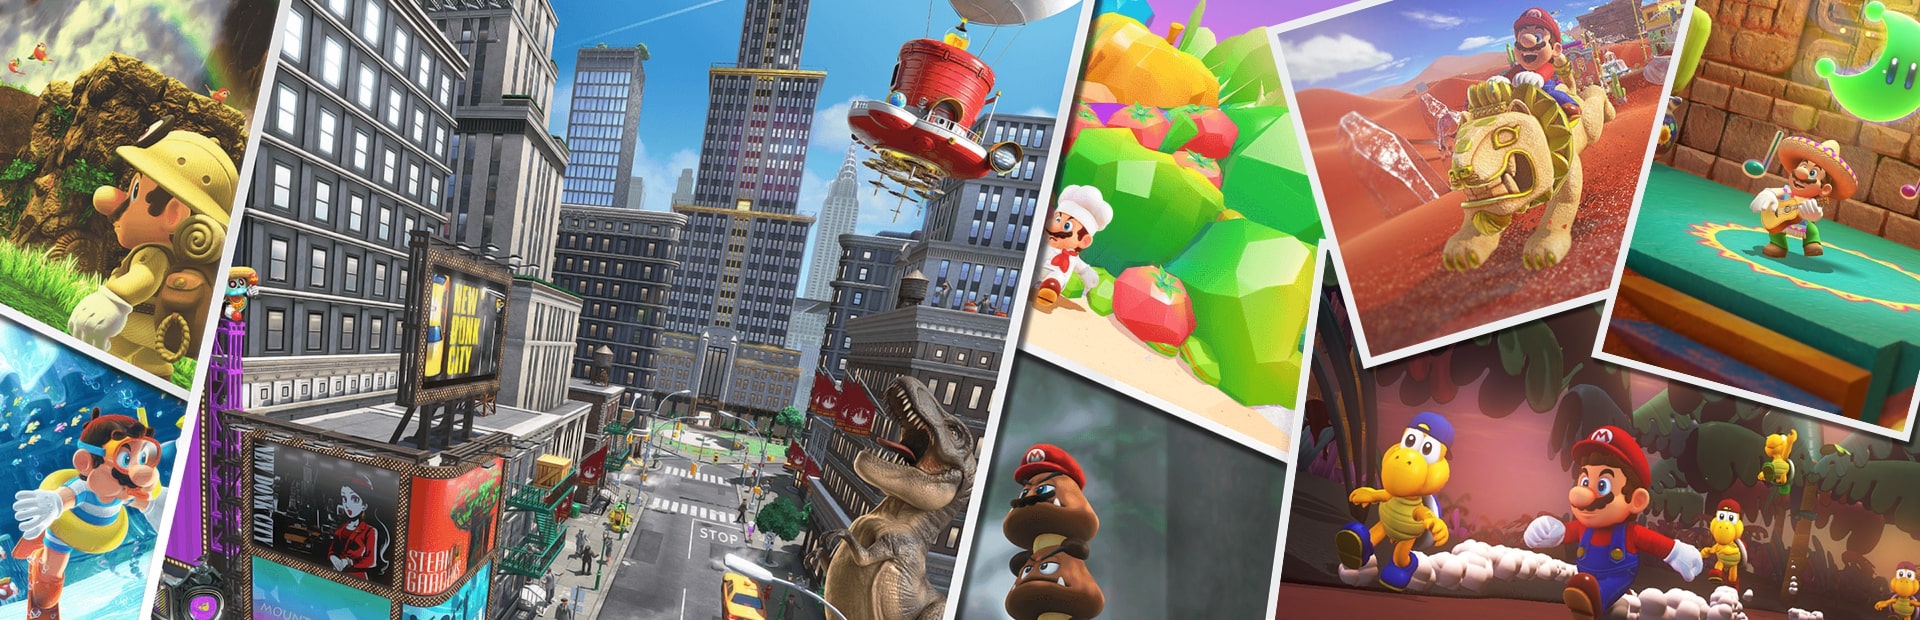 Video Game Review - Super Mario Odyssey - TRIMBLE COUNTY PUBLIC LIBRARY